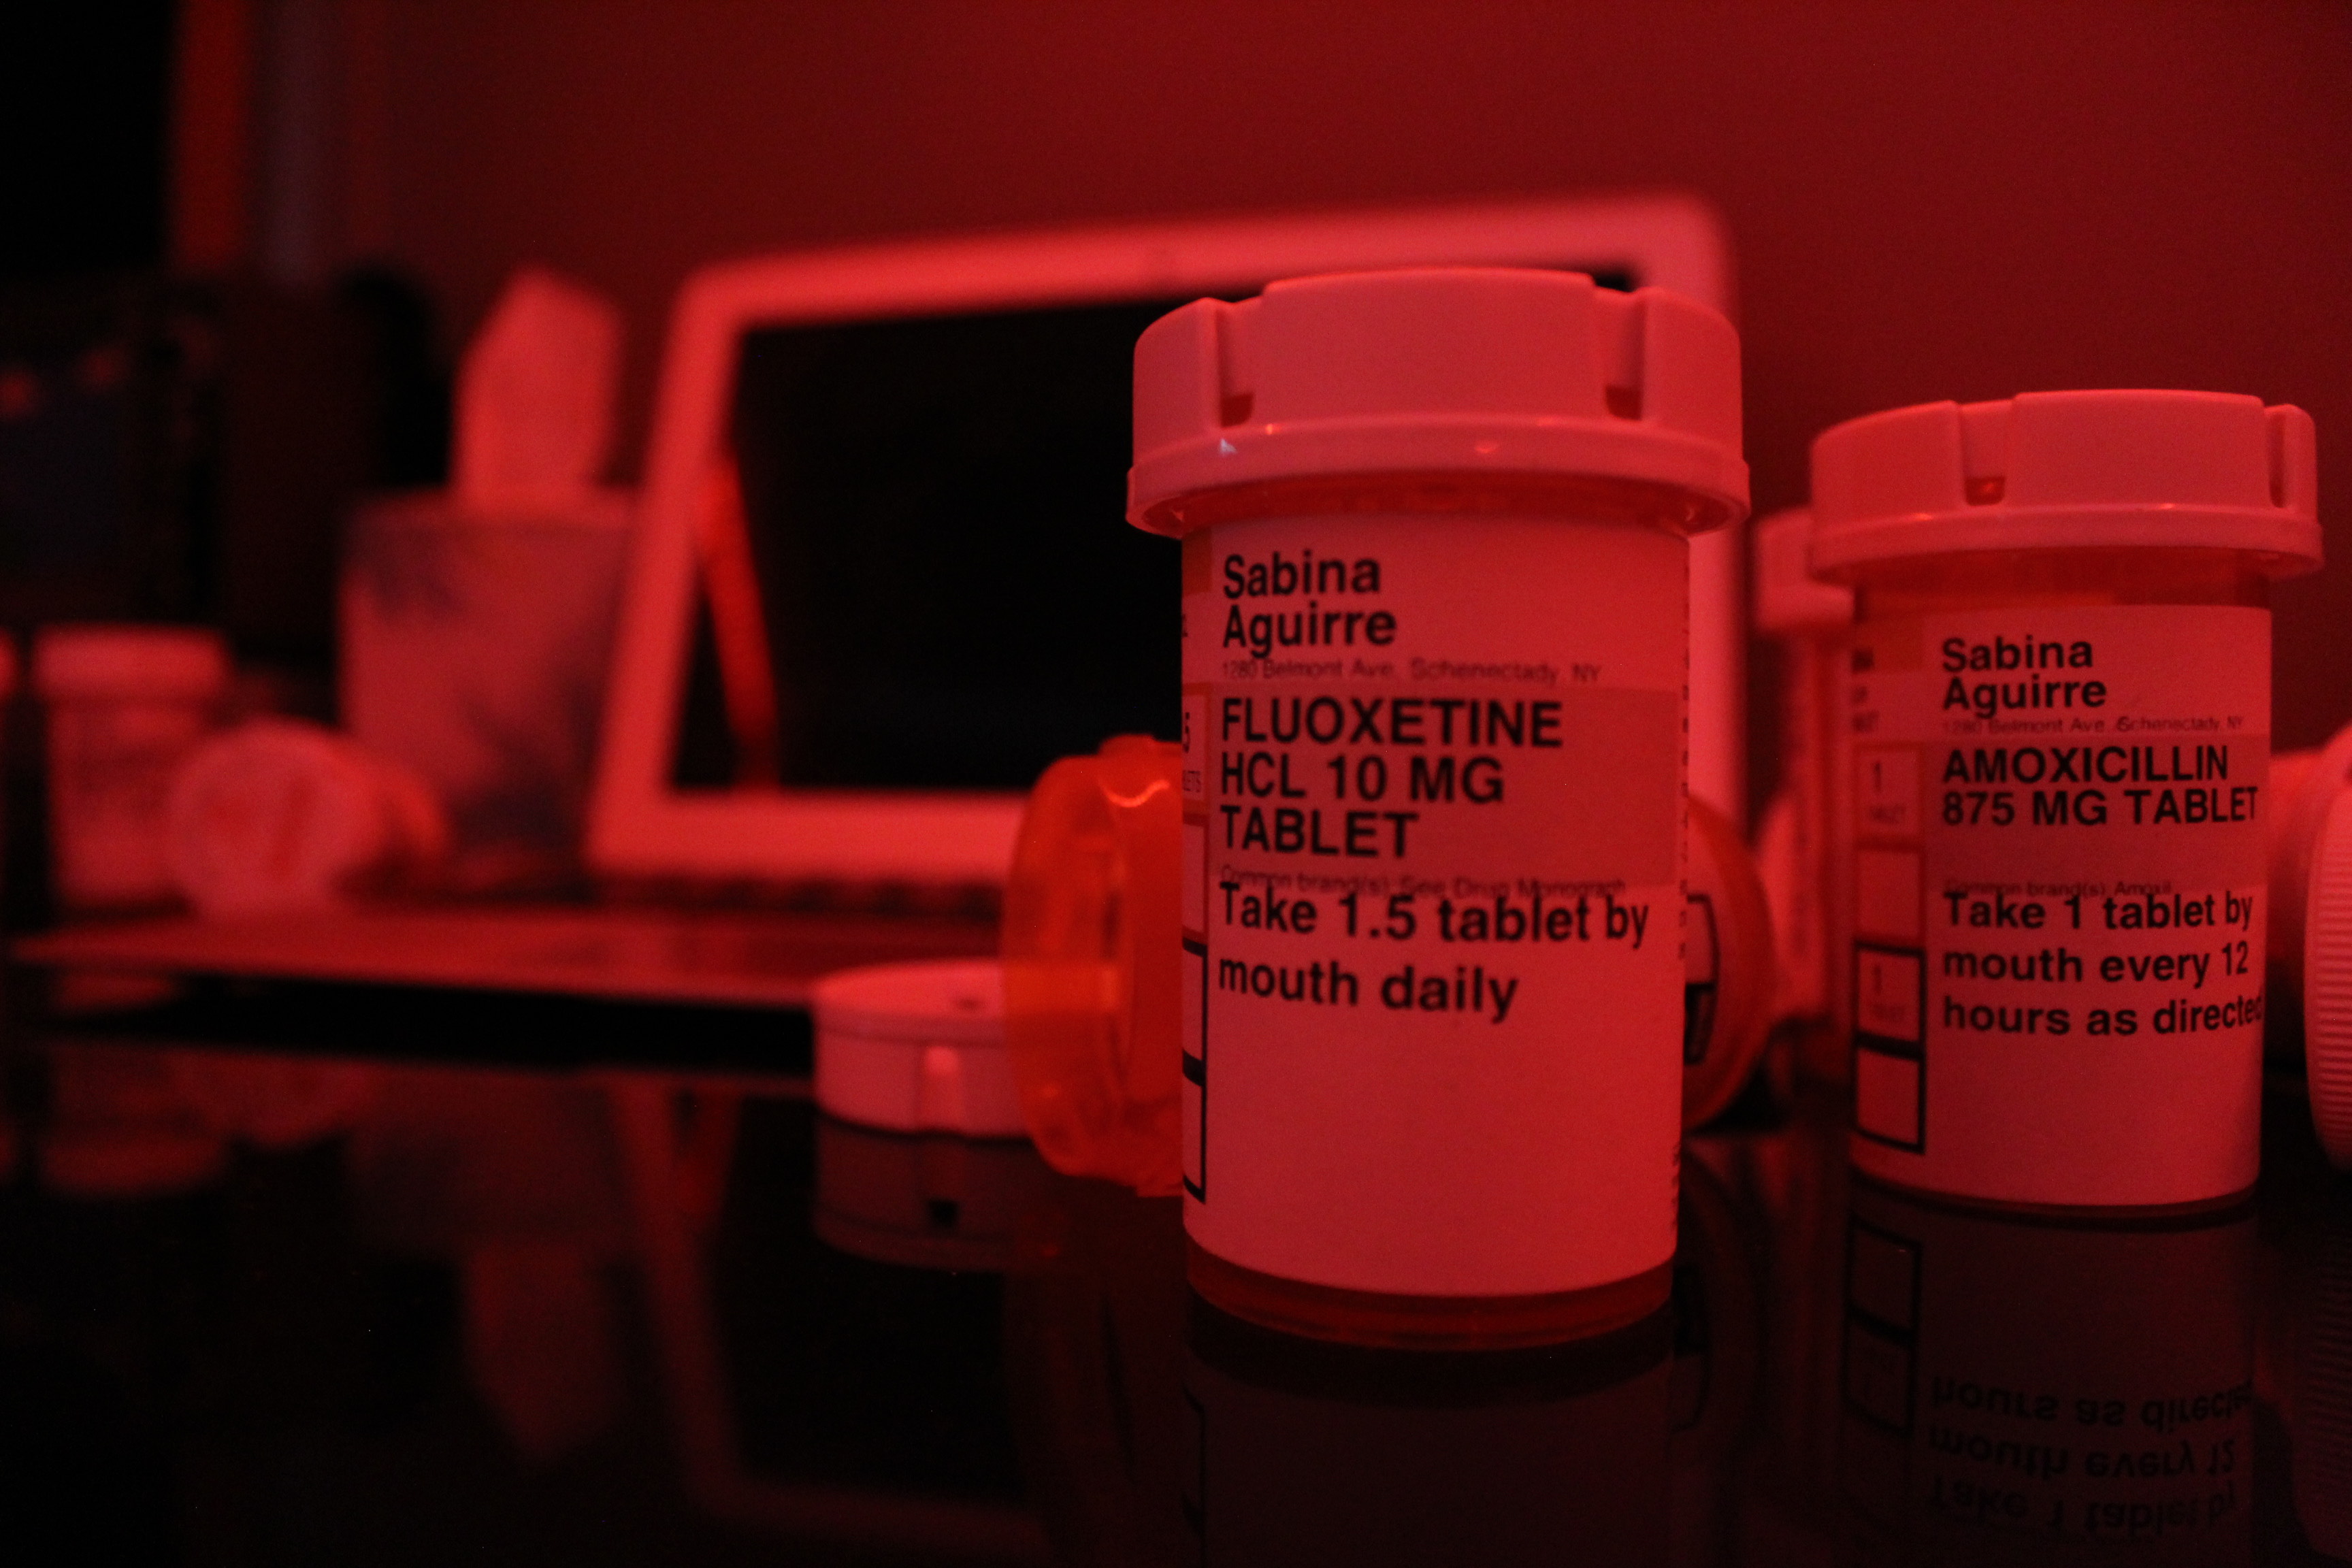 A red-tinted close-up photo of two pill bottles, labeled "Fluoxetine" and "Amoxicillin," prescribed to Sabina Aguirre